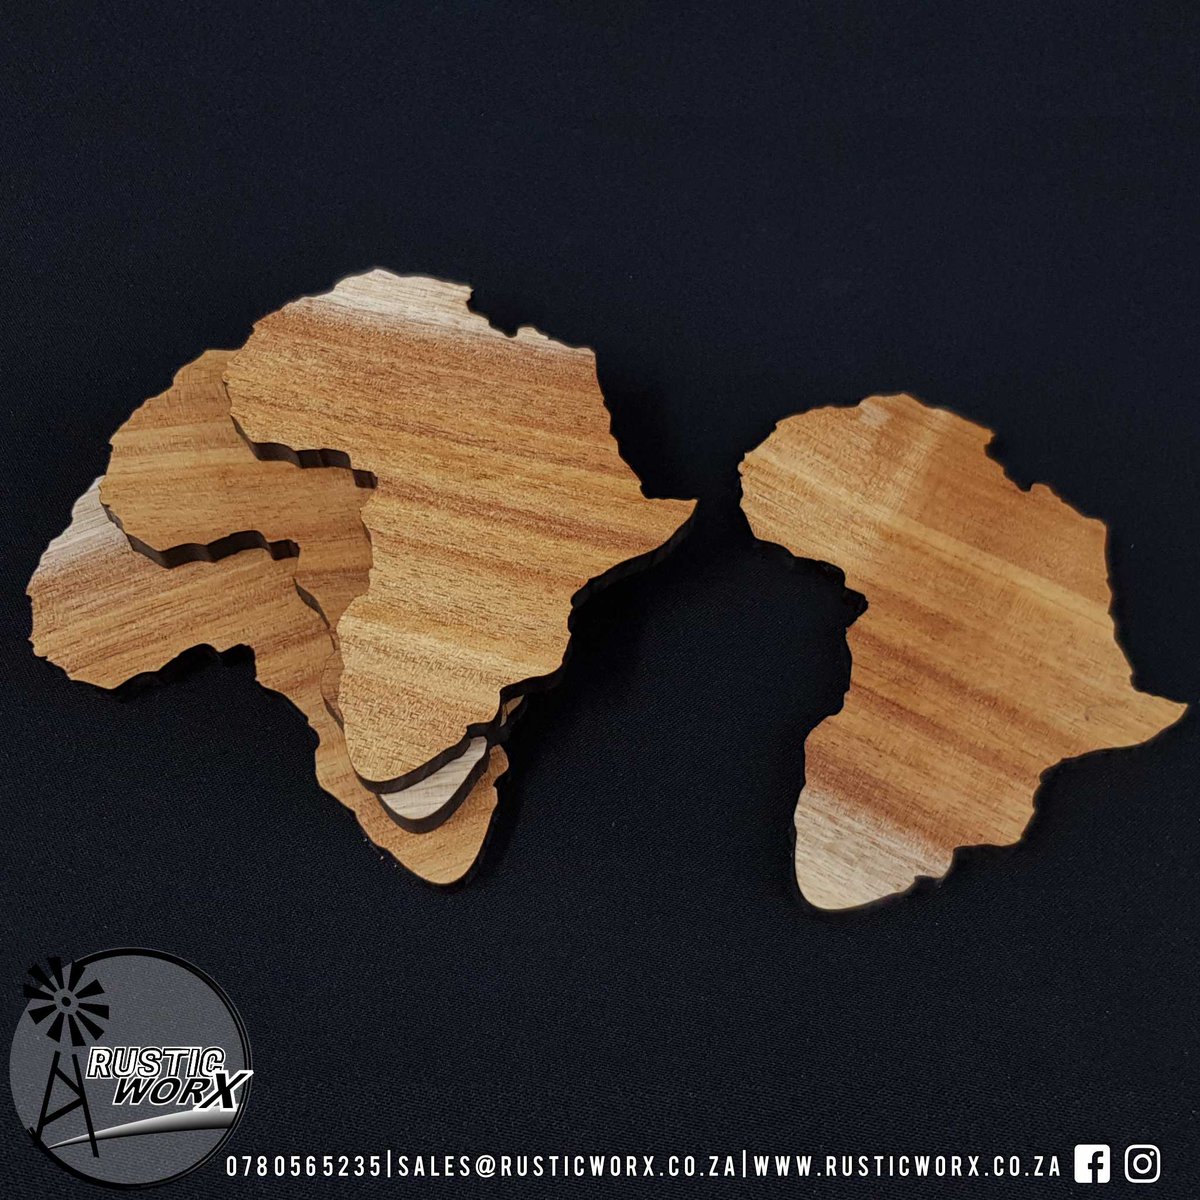 We're obsessed with these Custom Hardwood Coasters we made for a very special client. Should these be added to our range?

Contact us on sales@rusticworx.co.za 
#Coasters #hardwoodcoasters #customcoasters #cnc #rusticworx